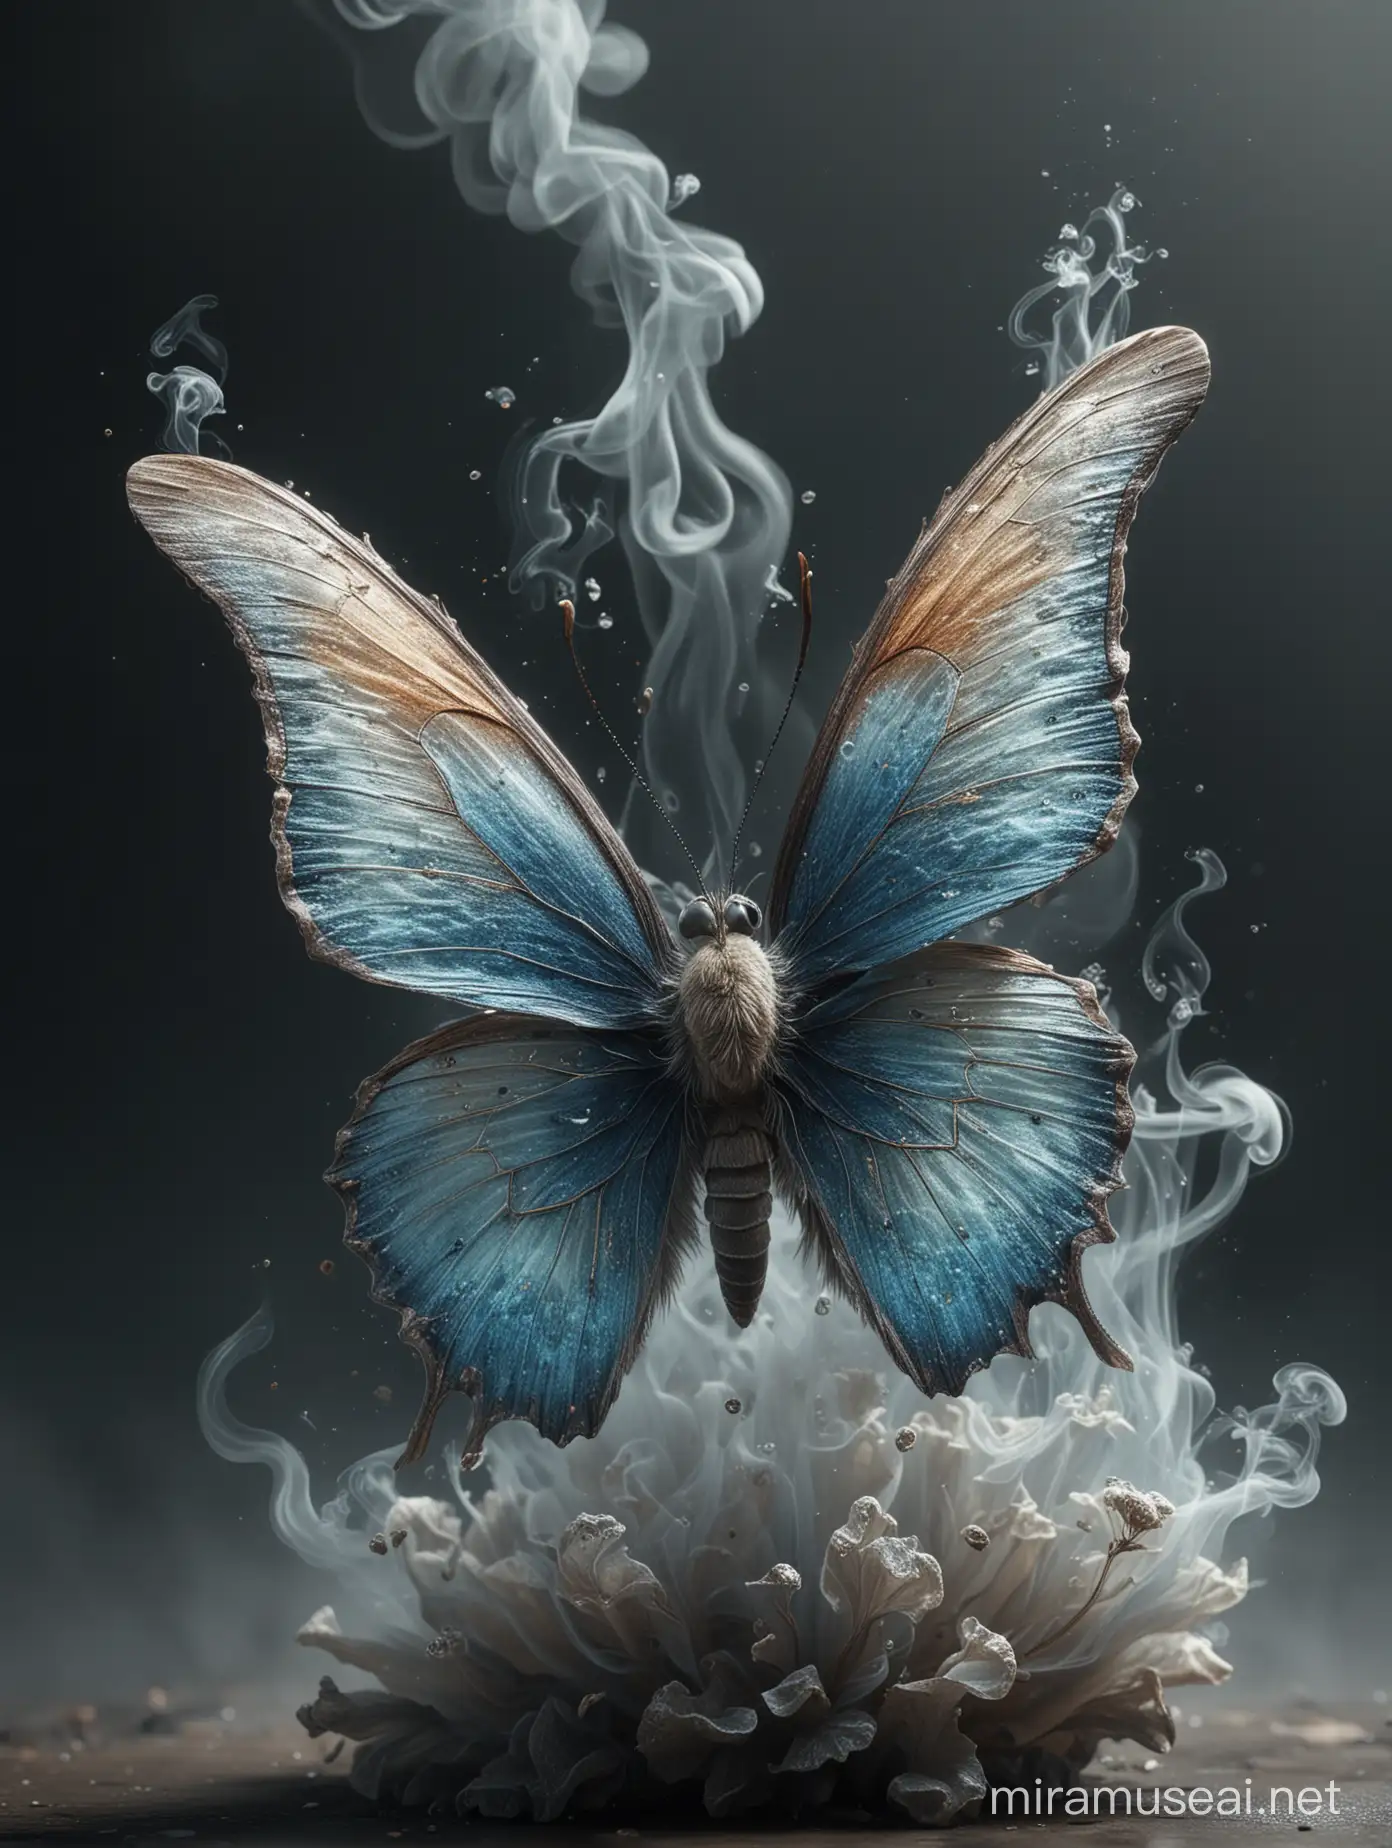 hyper-realistic (RAW, analog), butterfly elf, the image is flooded with smoke, ultra unique natural textures, slight imperfections, vray